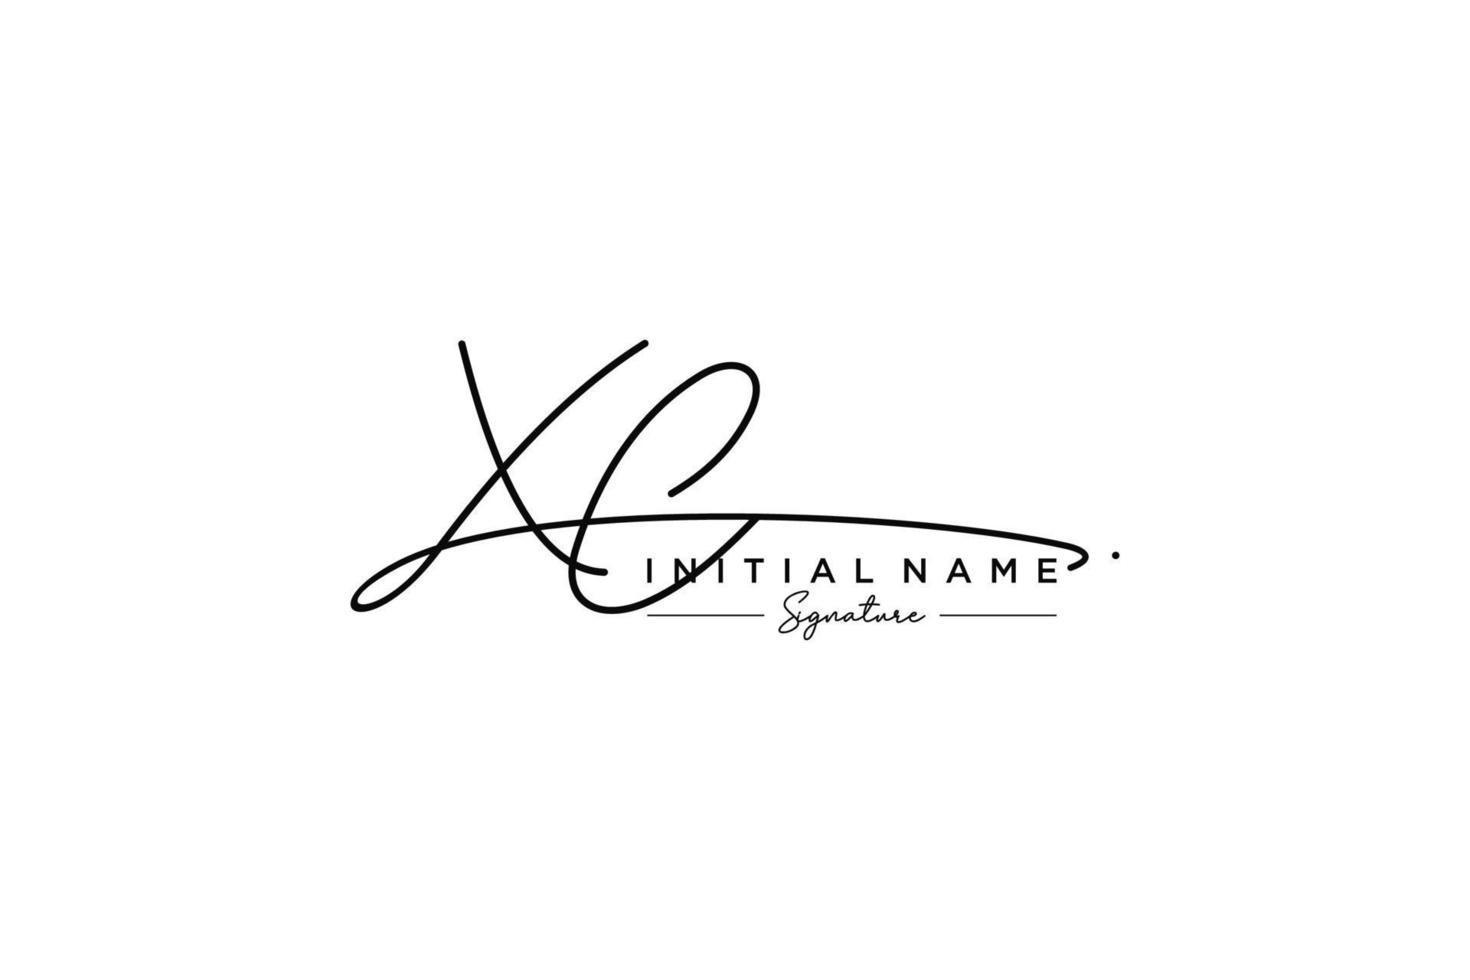 Initial XC signature logo template vector. Hand drawn Calligraphy lettering Vector illustration.